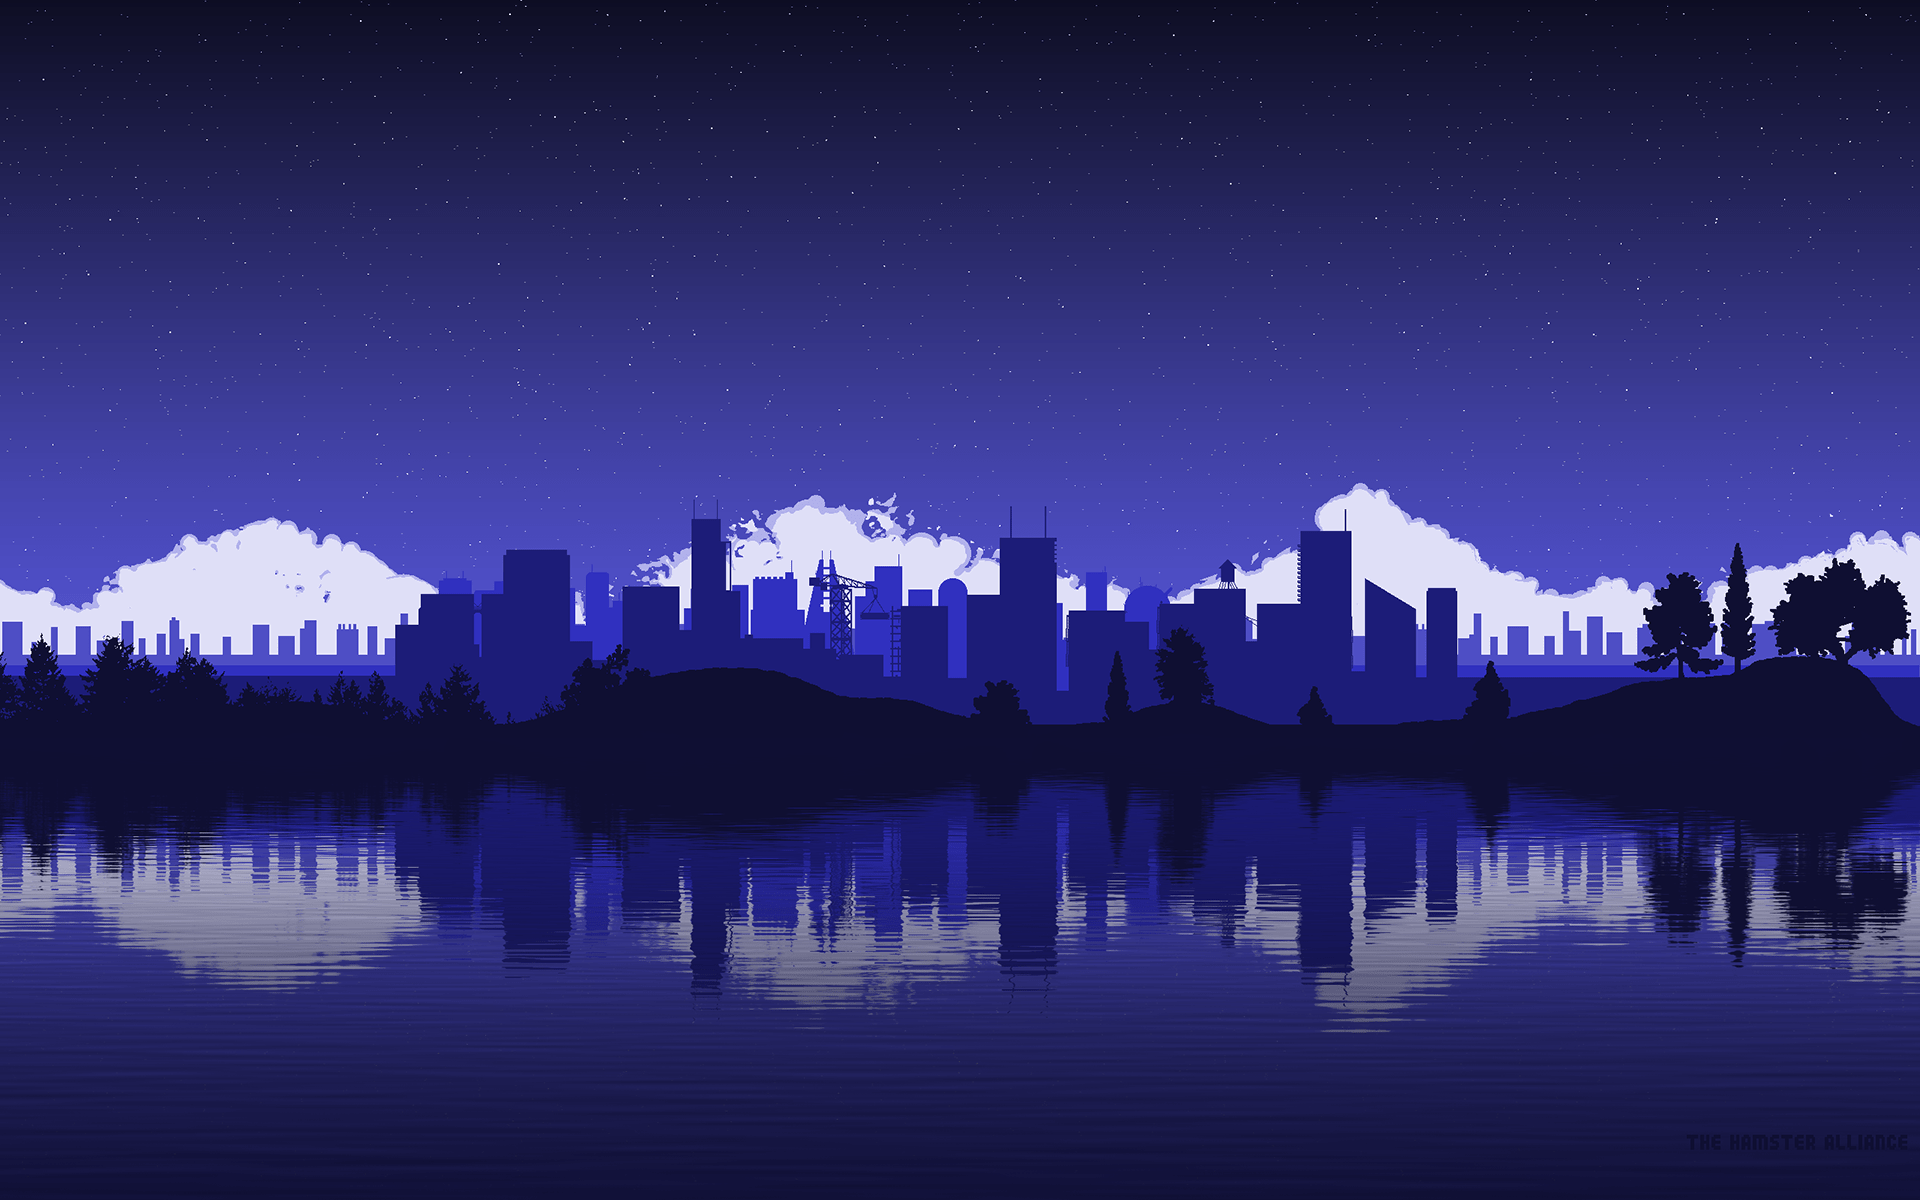 A city skyline at night with a lake in the foreground - Pixel art